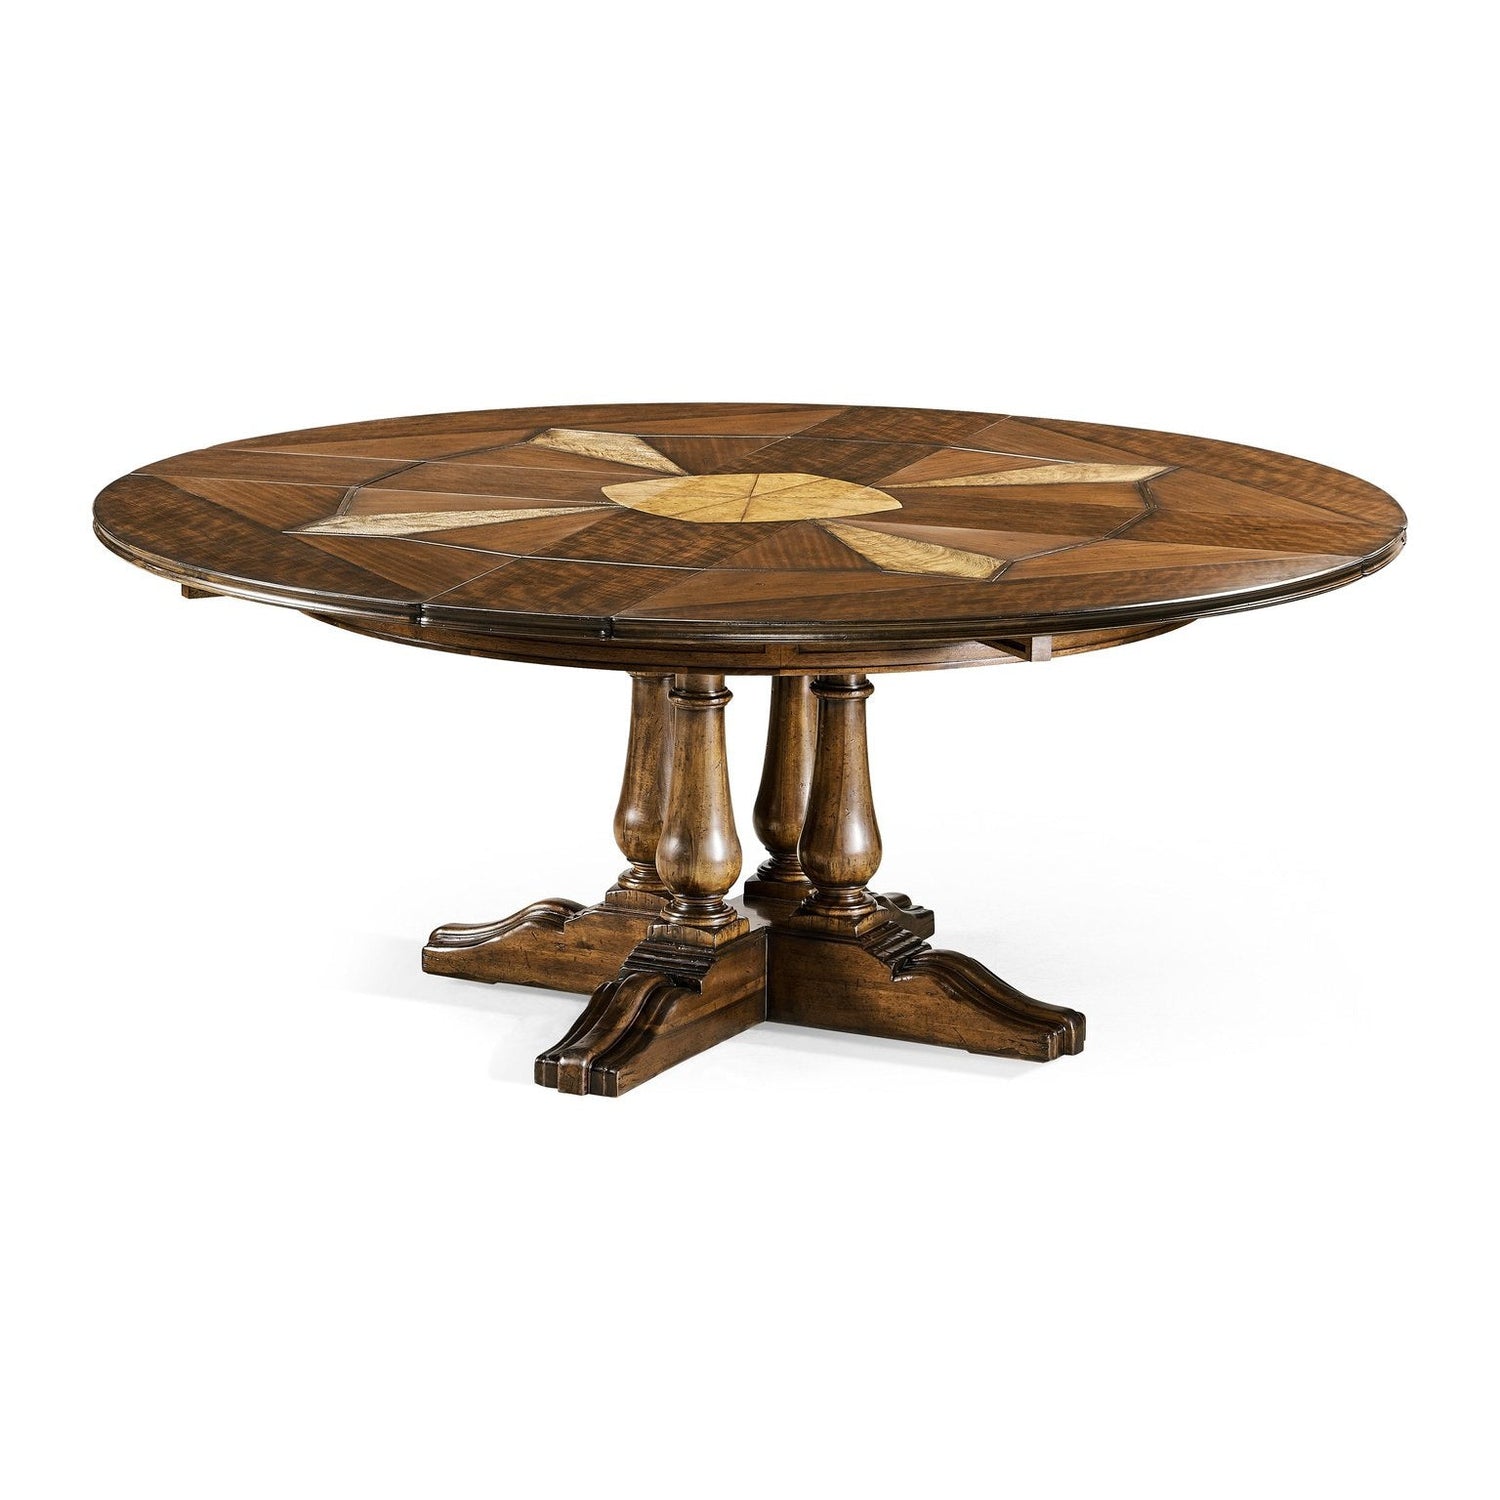 Jonathan Charles, 59" Round country extending dining table